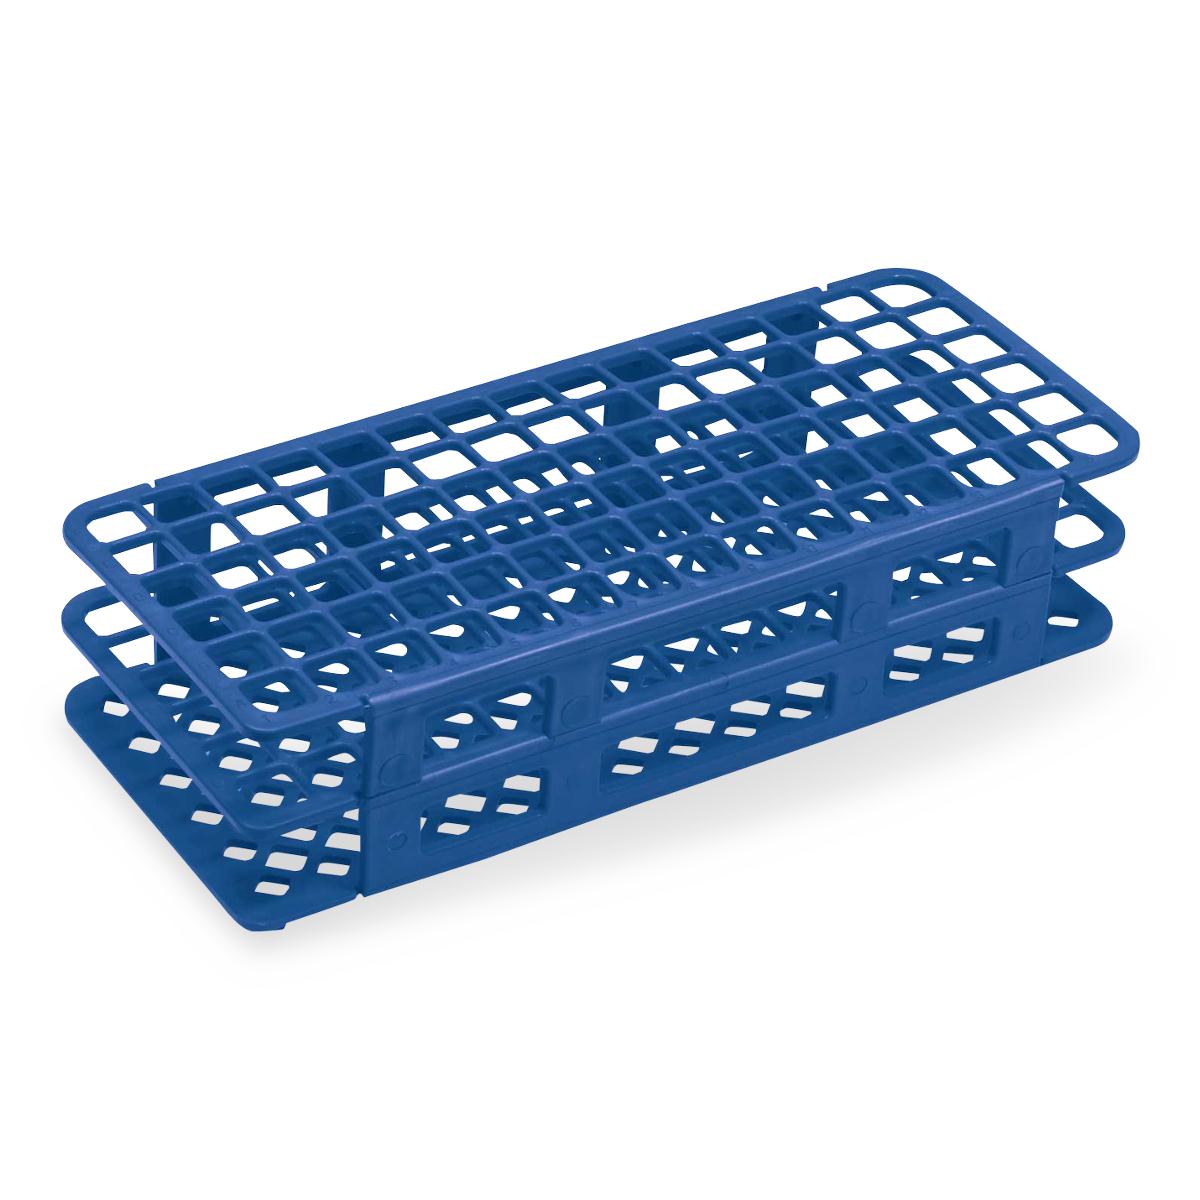 40-Place Snap-N-Rack Autoclavable PP Tube Rack for 25mm Tubes